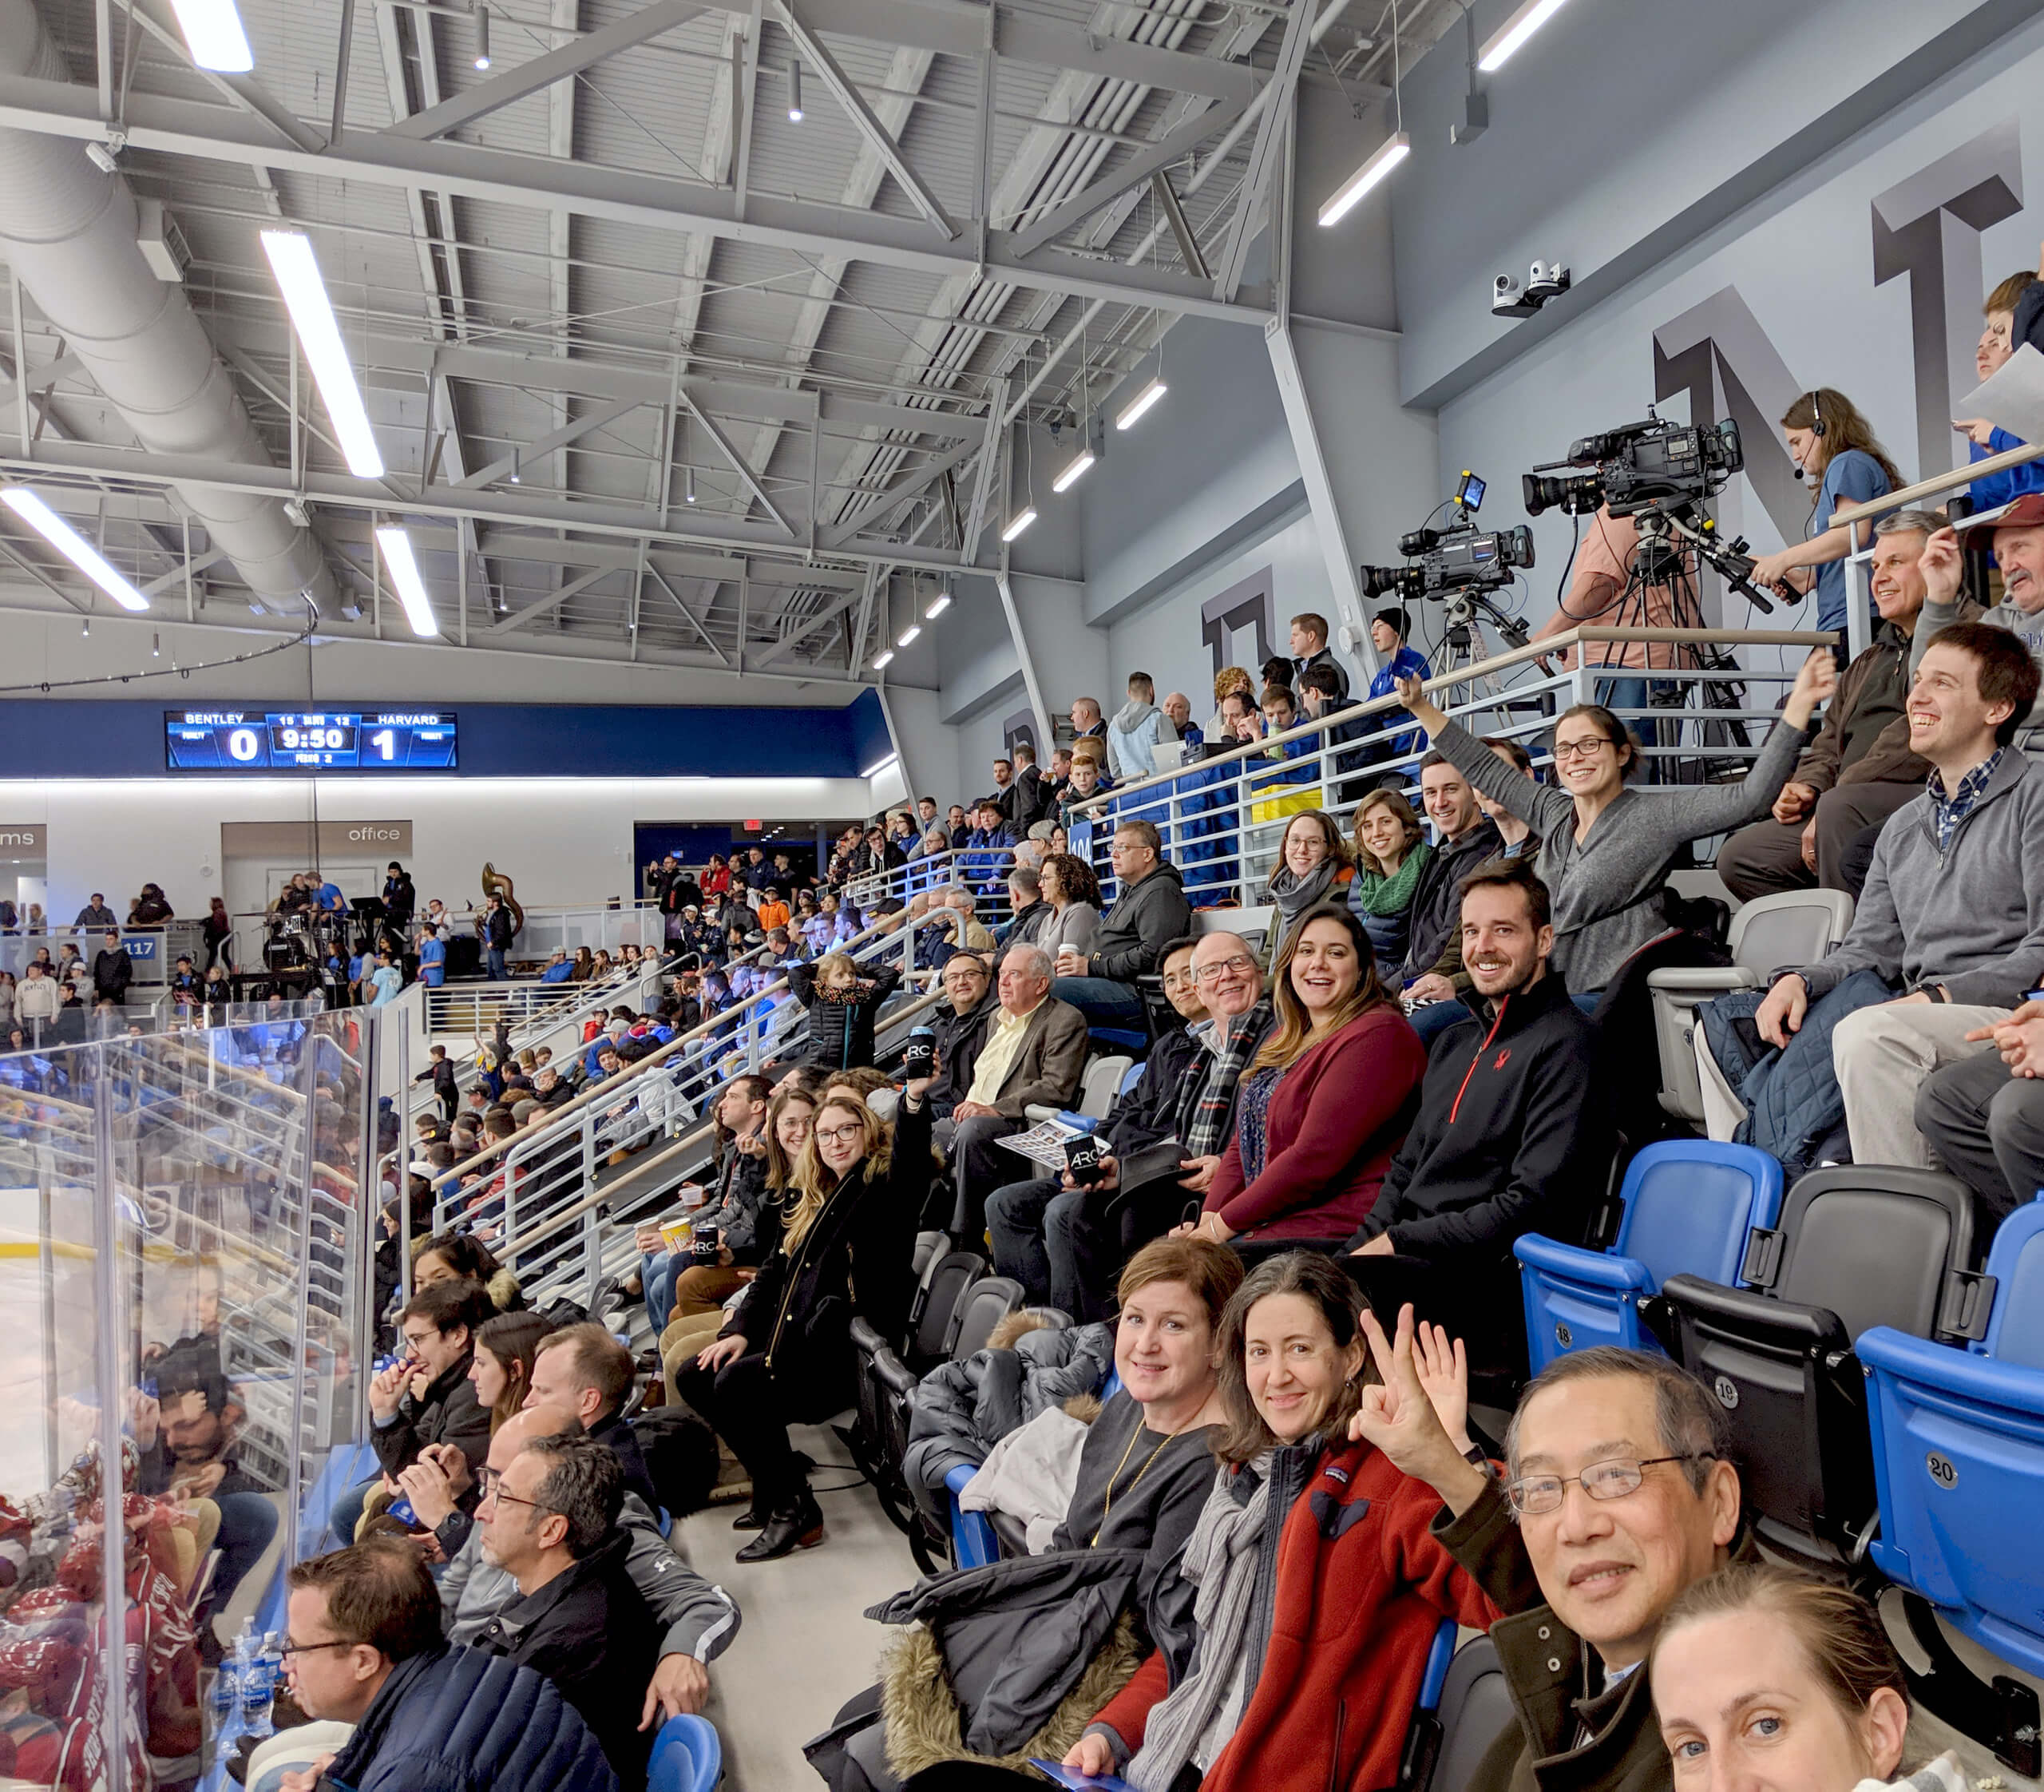 ARC staff at Bentley University arena for a hockey game